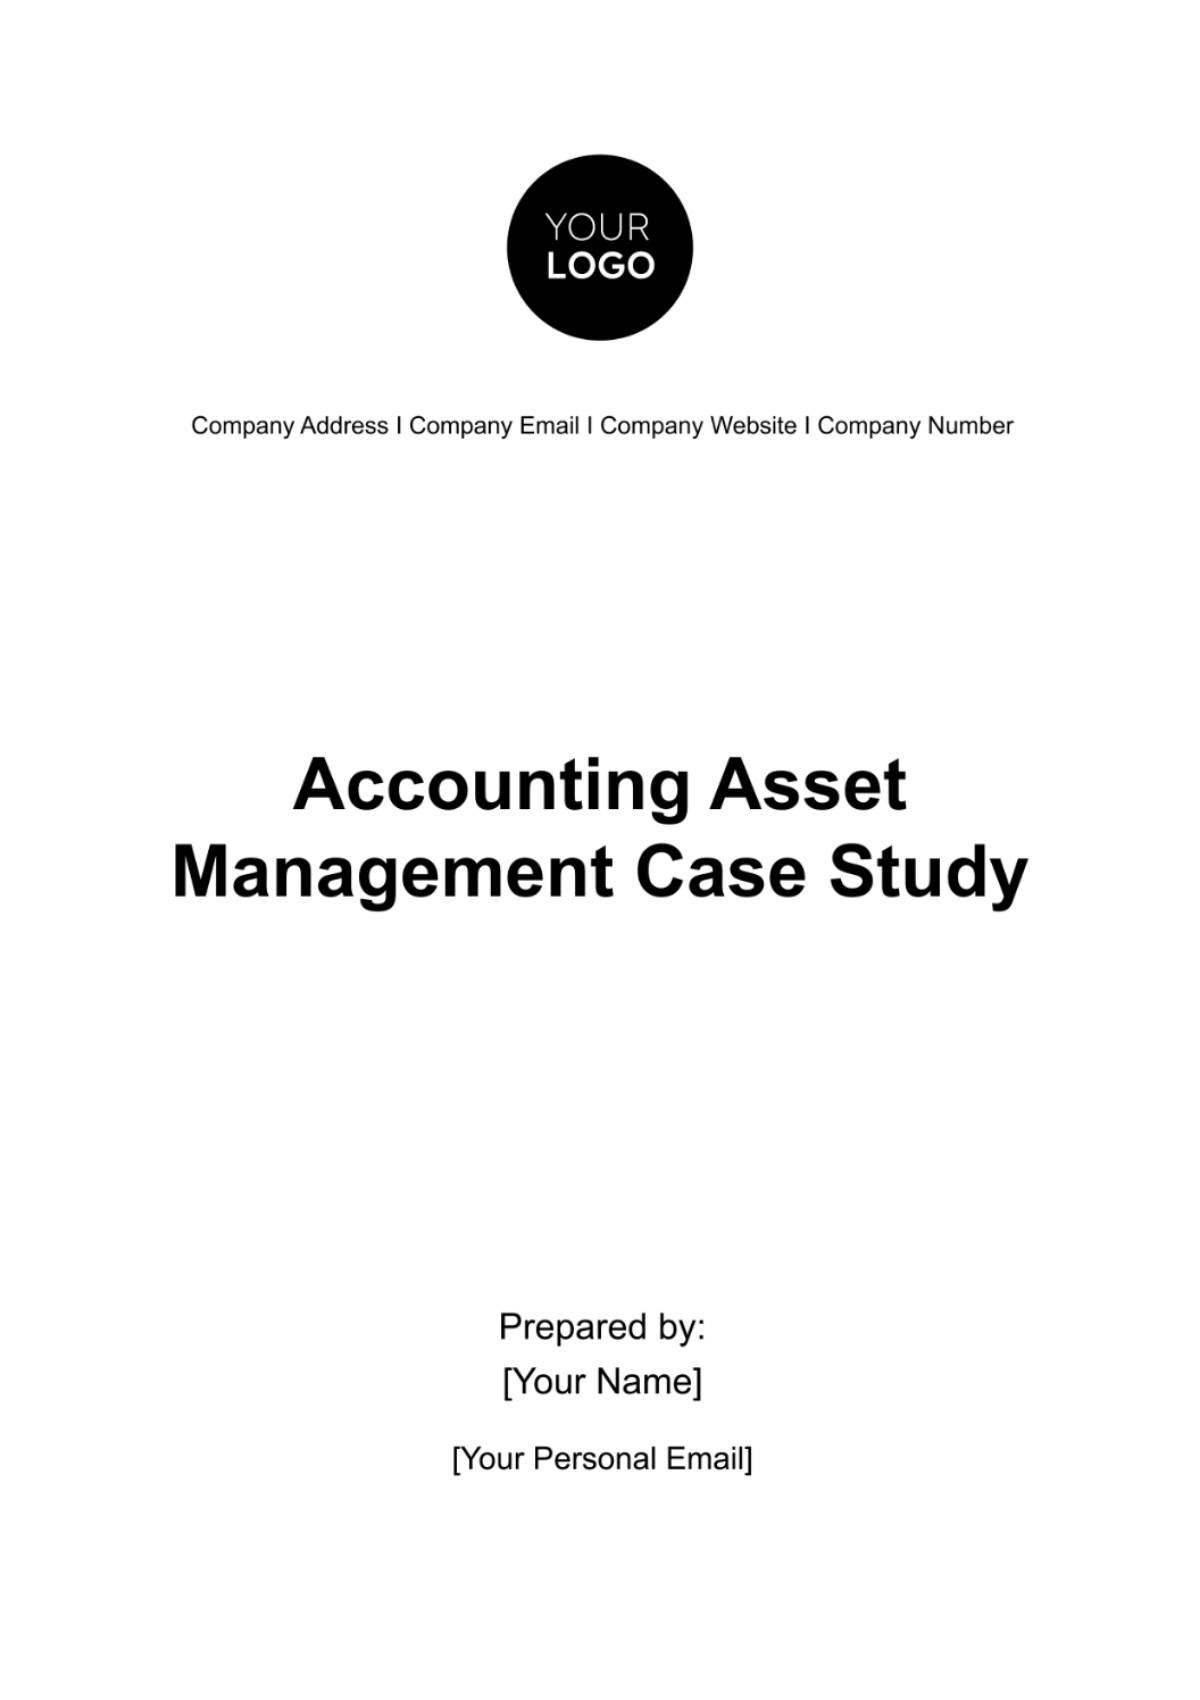 Accounting Asset Management Case Study Template